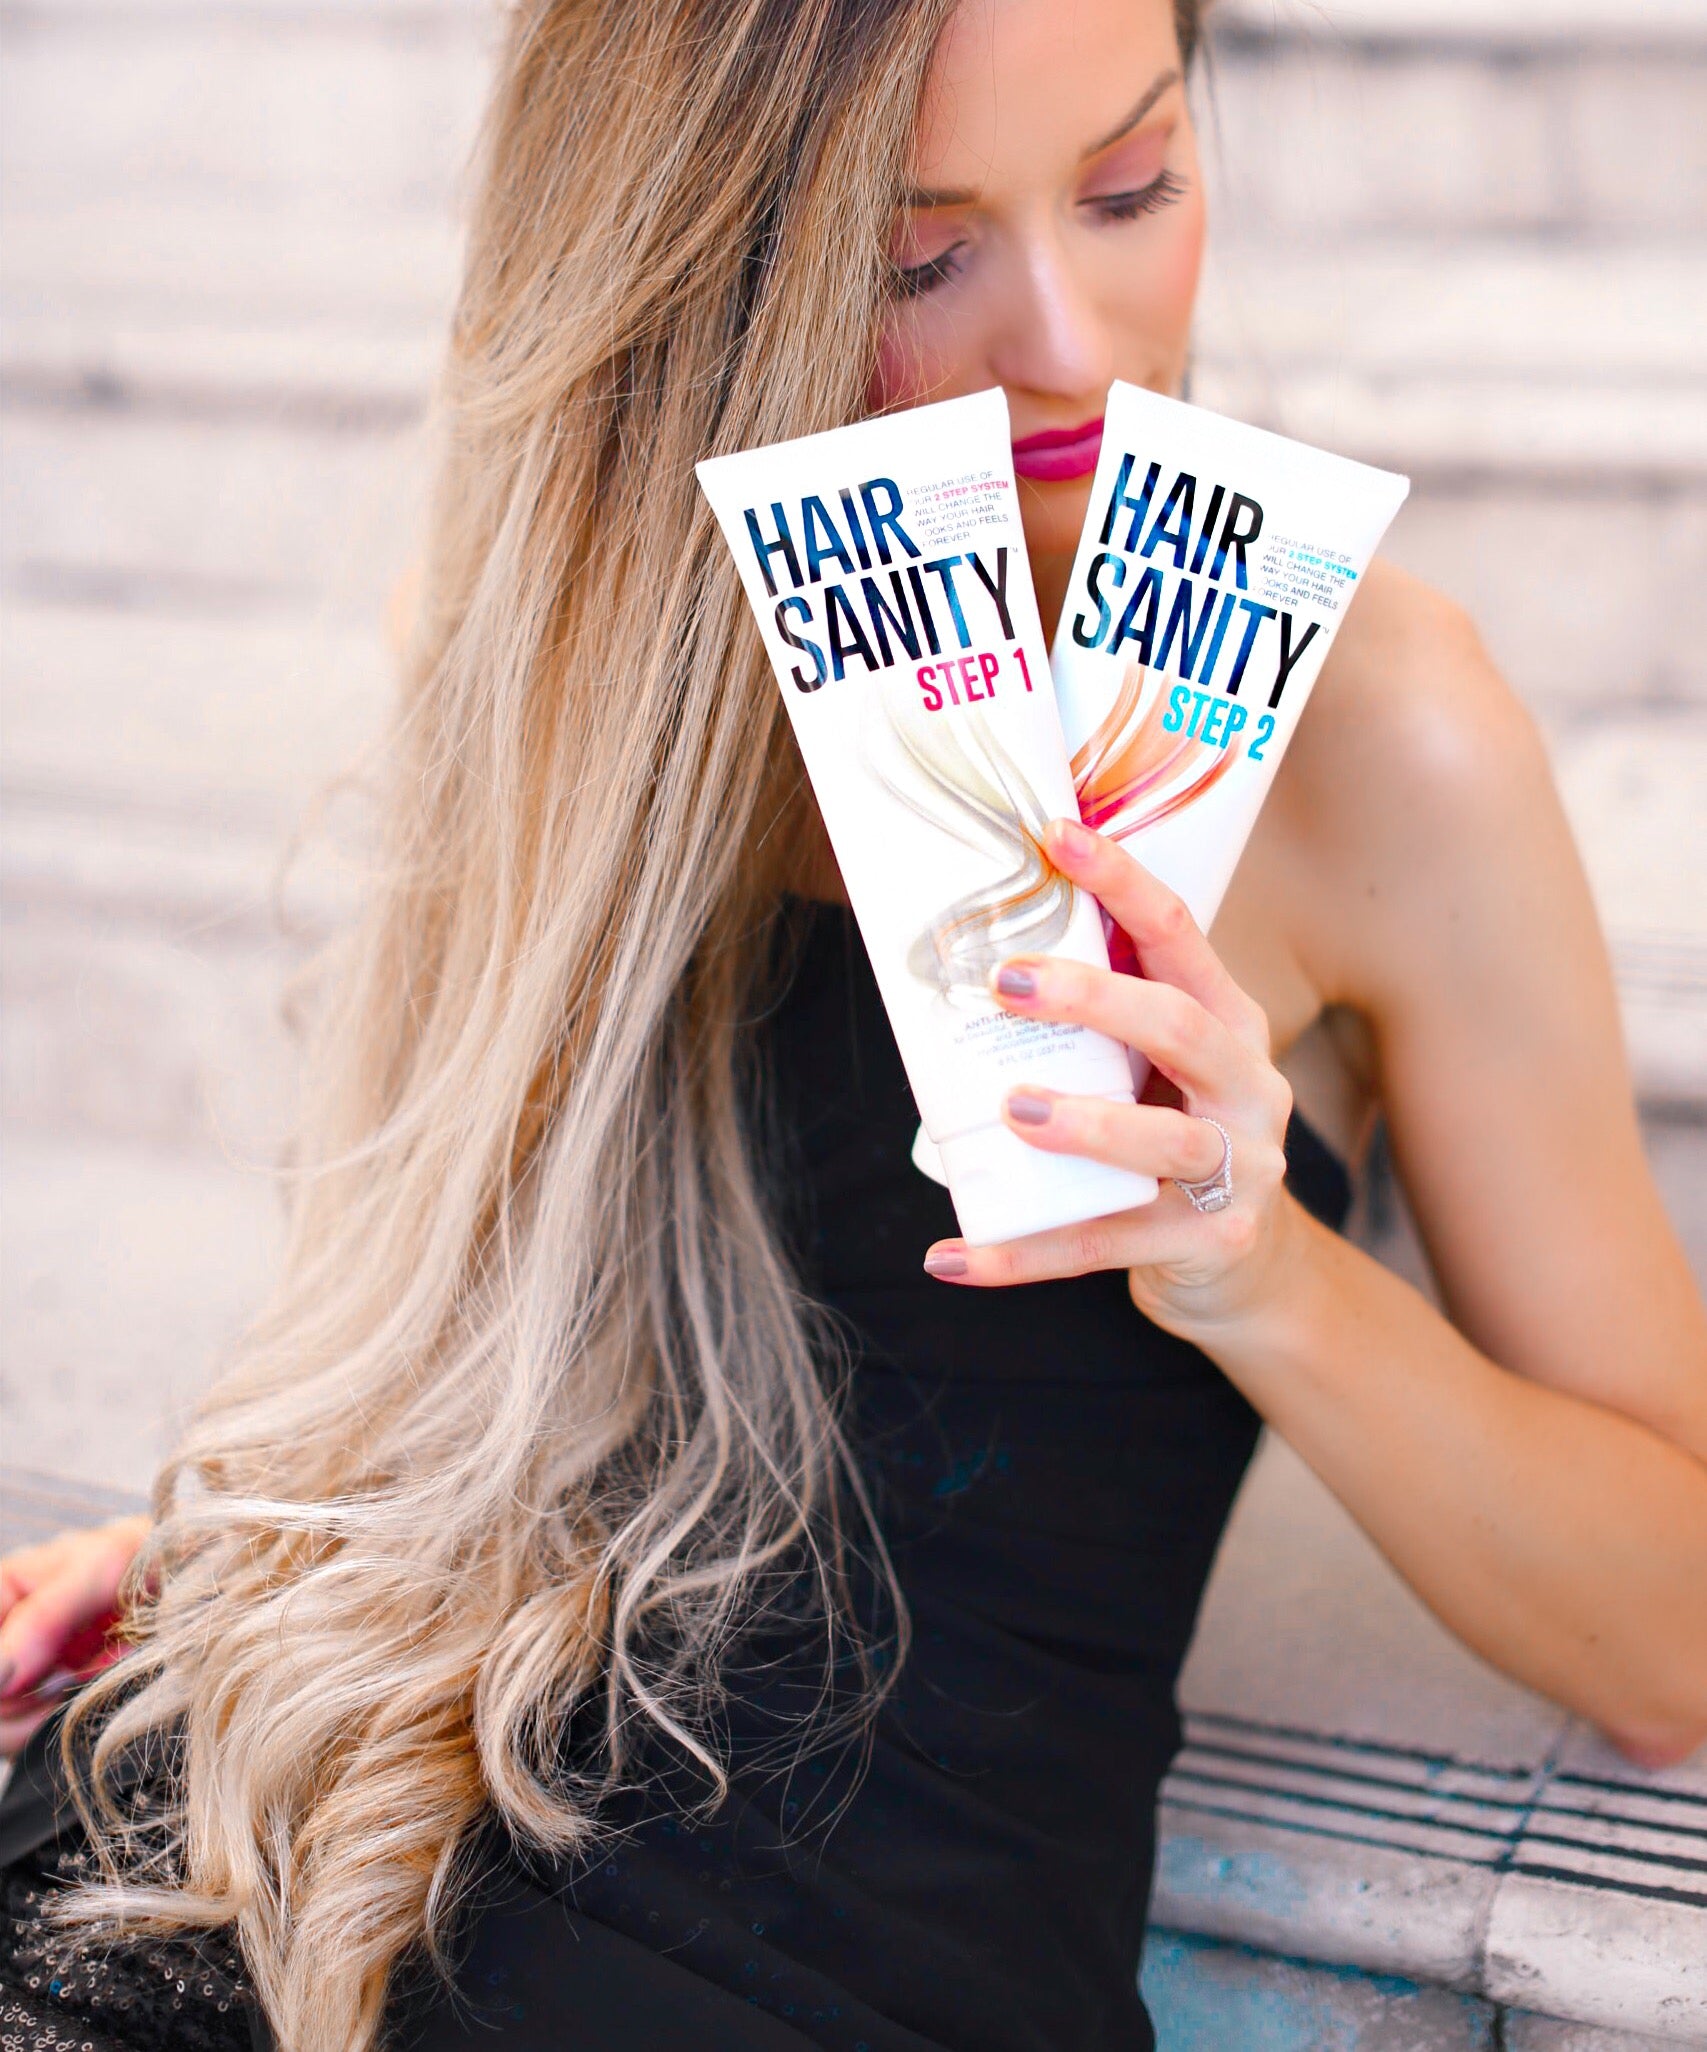 Giveaway, Review, Before/After:  HairSanity Hair Care (Shampoo and Conditioner) & How To Best Treat Dandruff